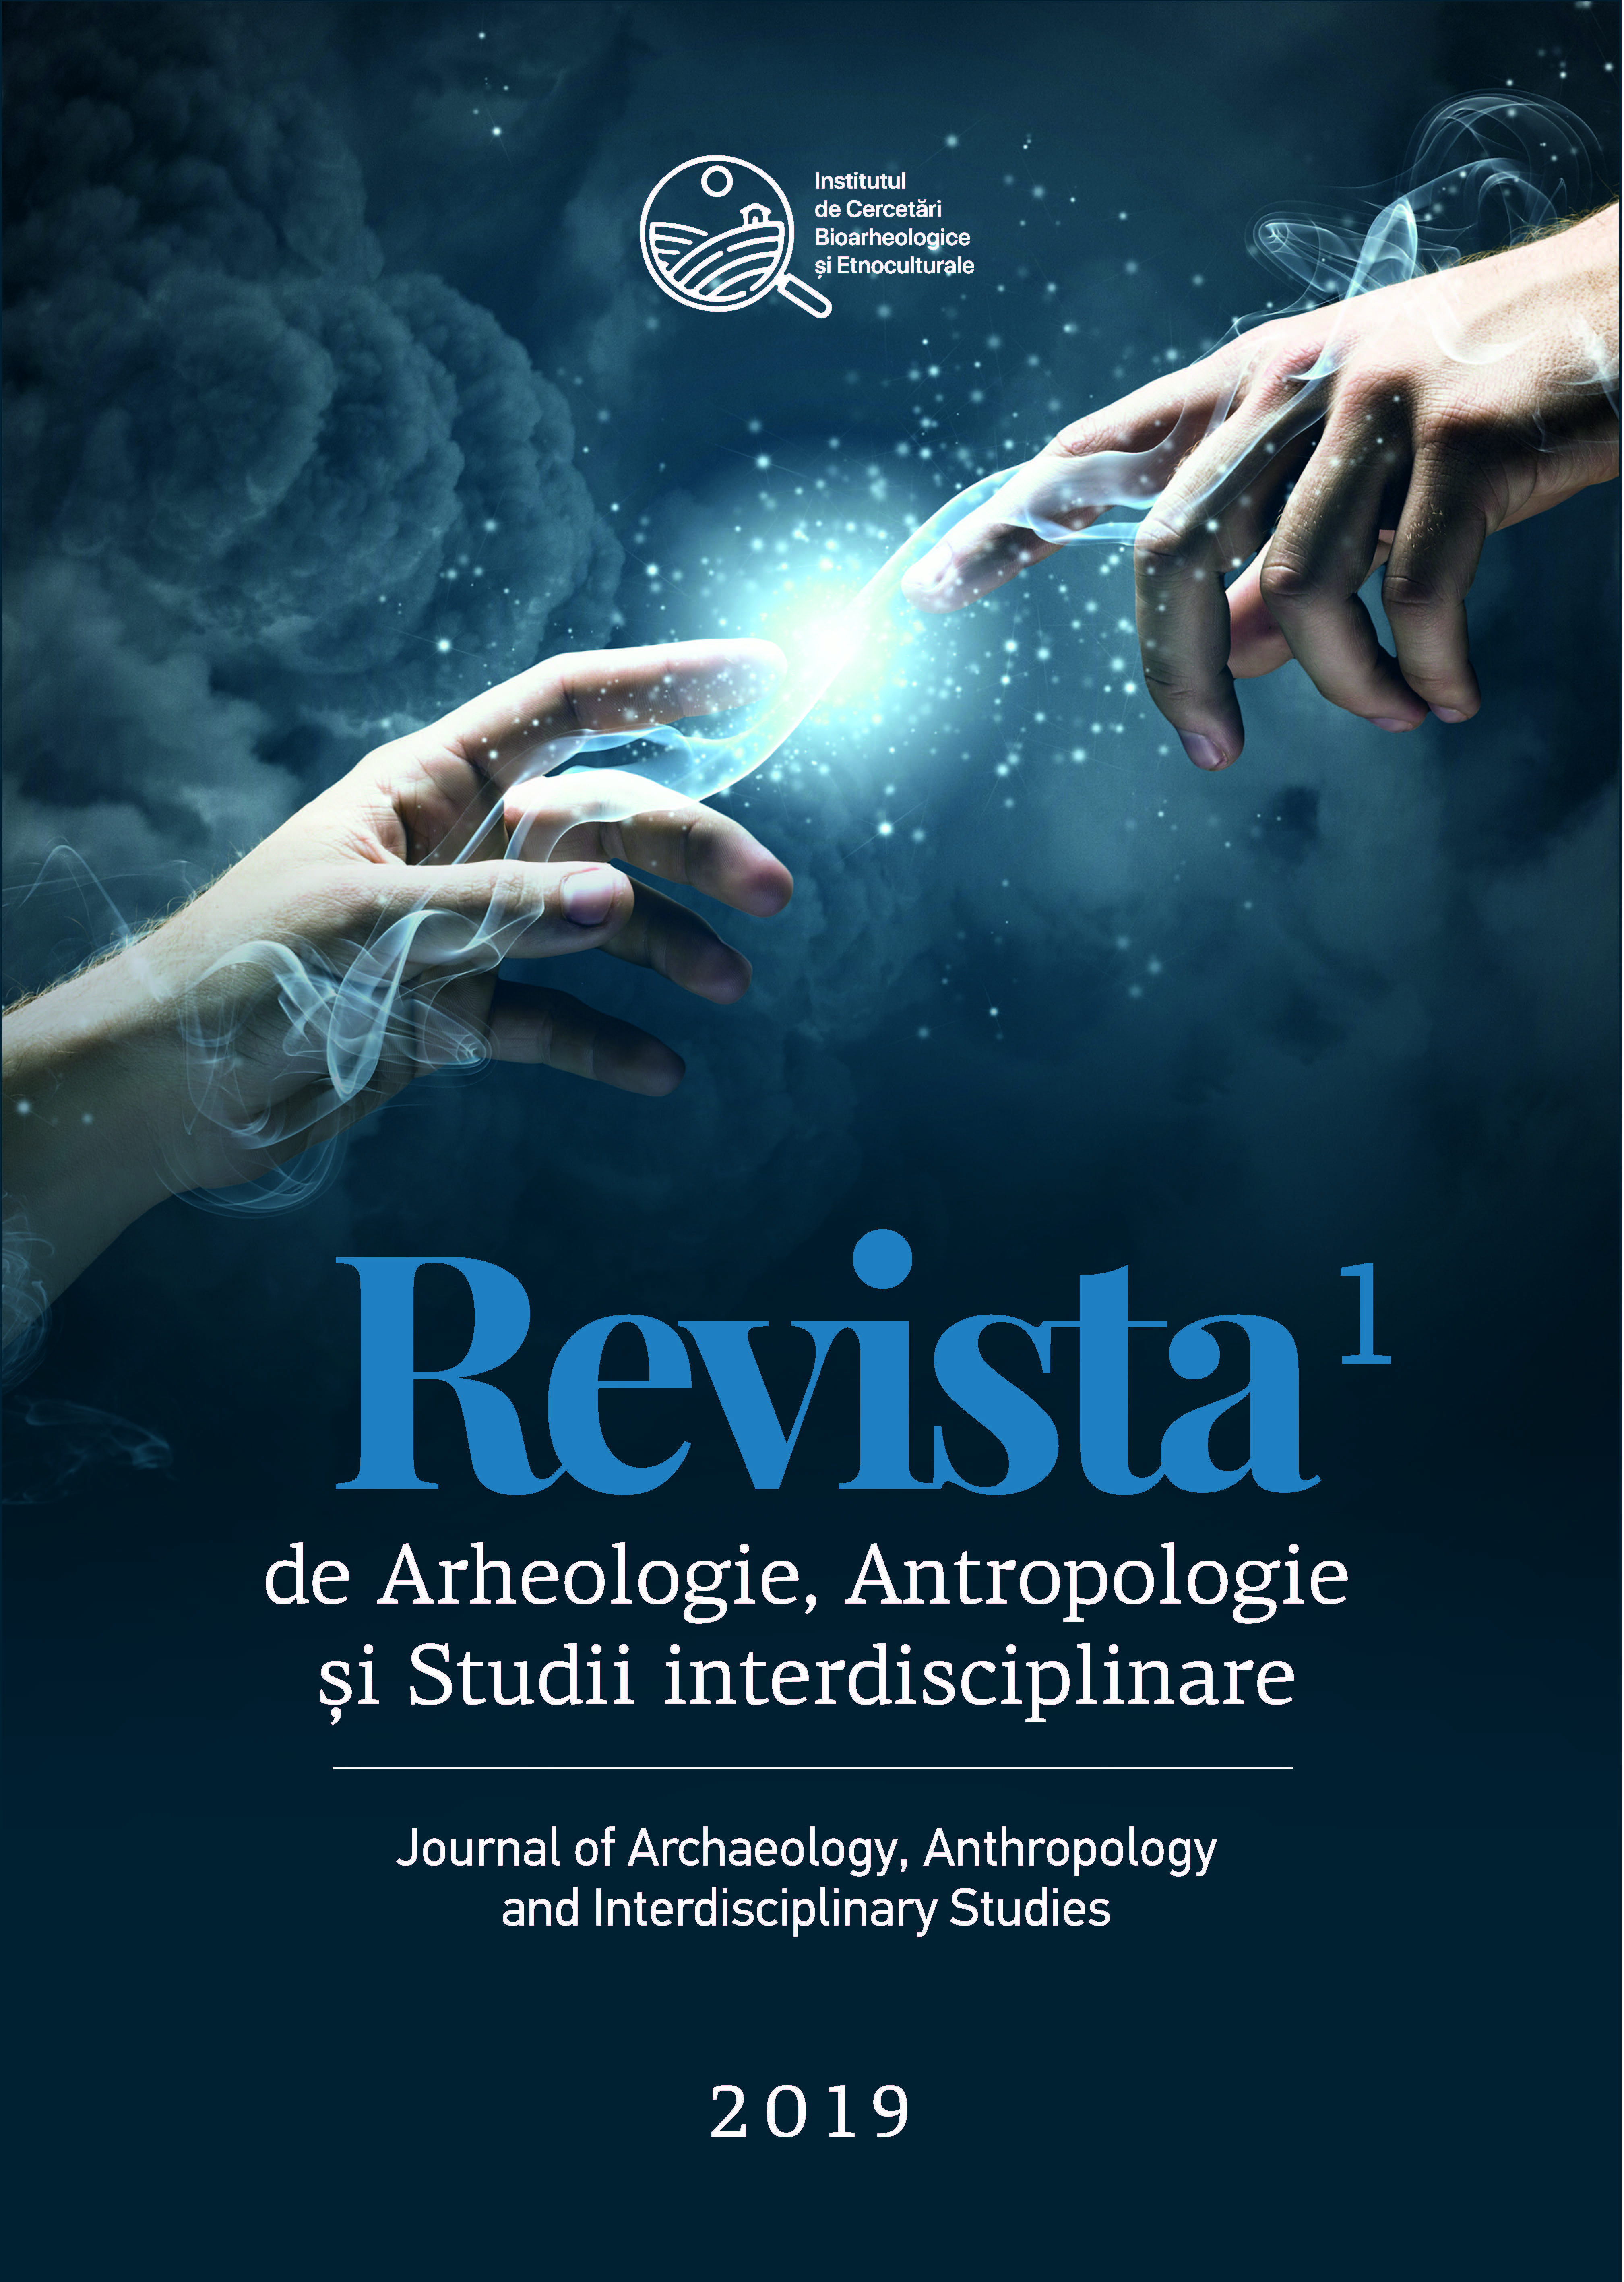 Comparative palaeoanthropological data of several populations belonging to the culture of Sântana de Mureș-Chernyakhov Cover Image